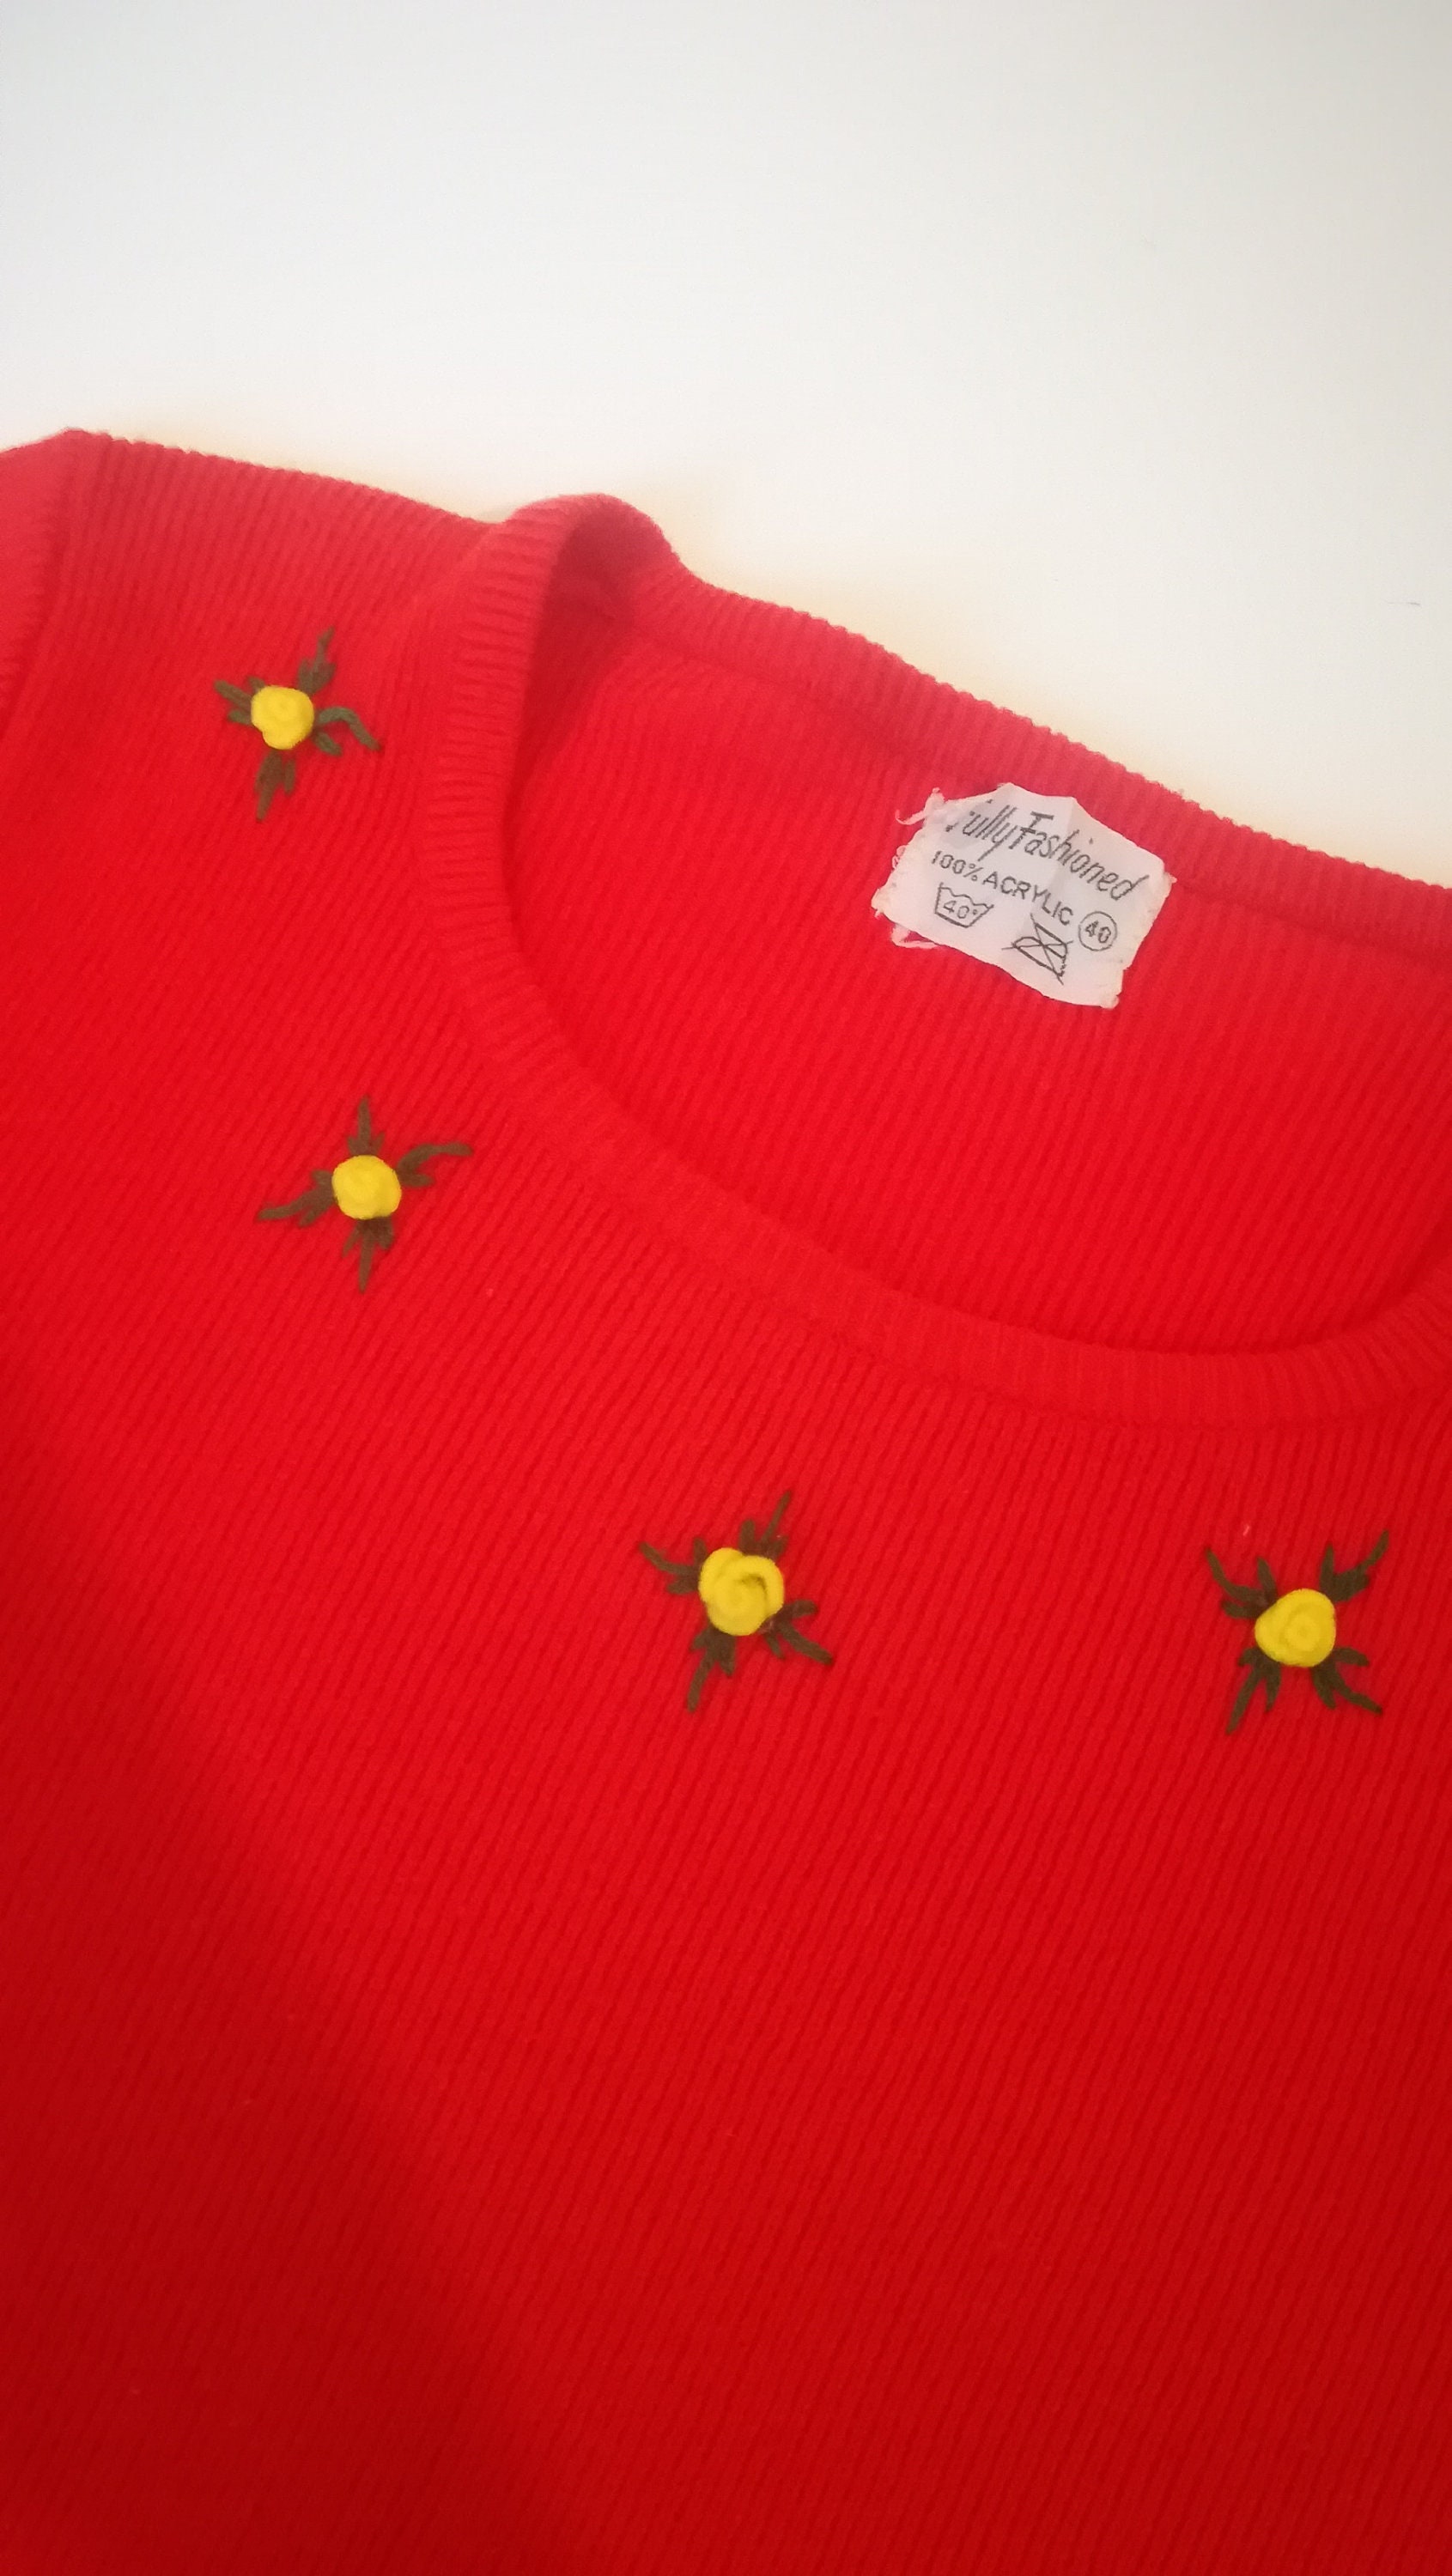 Red Vintage 60s 70s Knitted Top With Embroidered Flowers. - Etsy